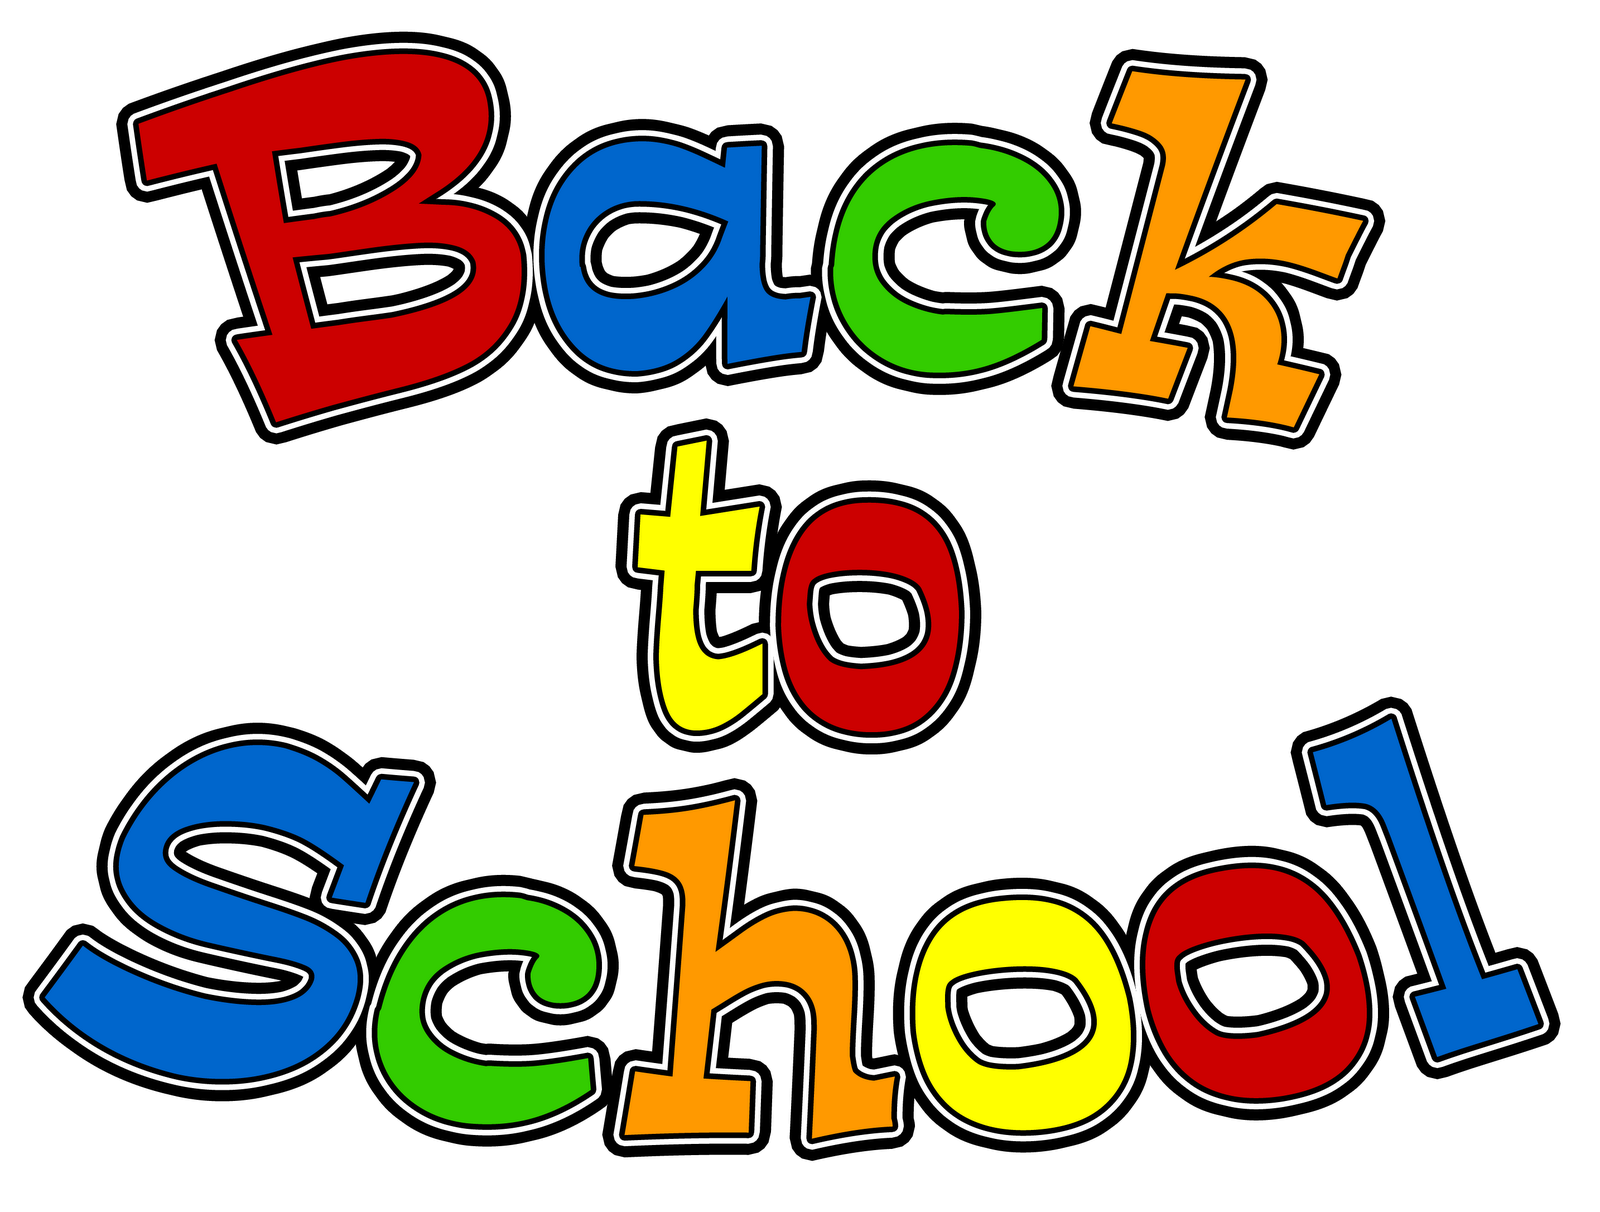 Welcome back to school clipart free